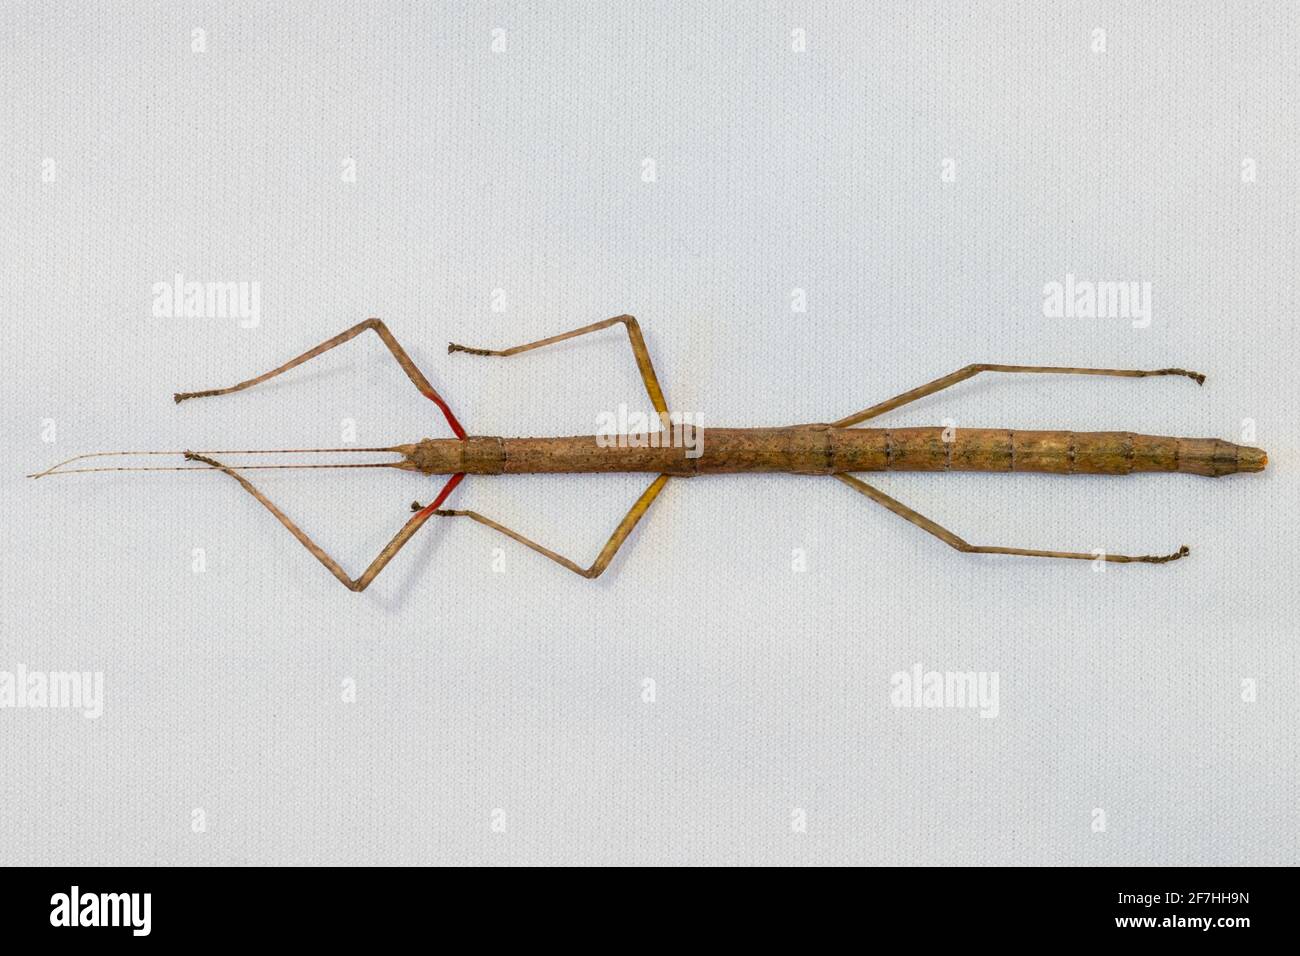 View of the top side of a common Indian stick insect pet Stock Photo